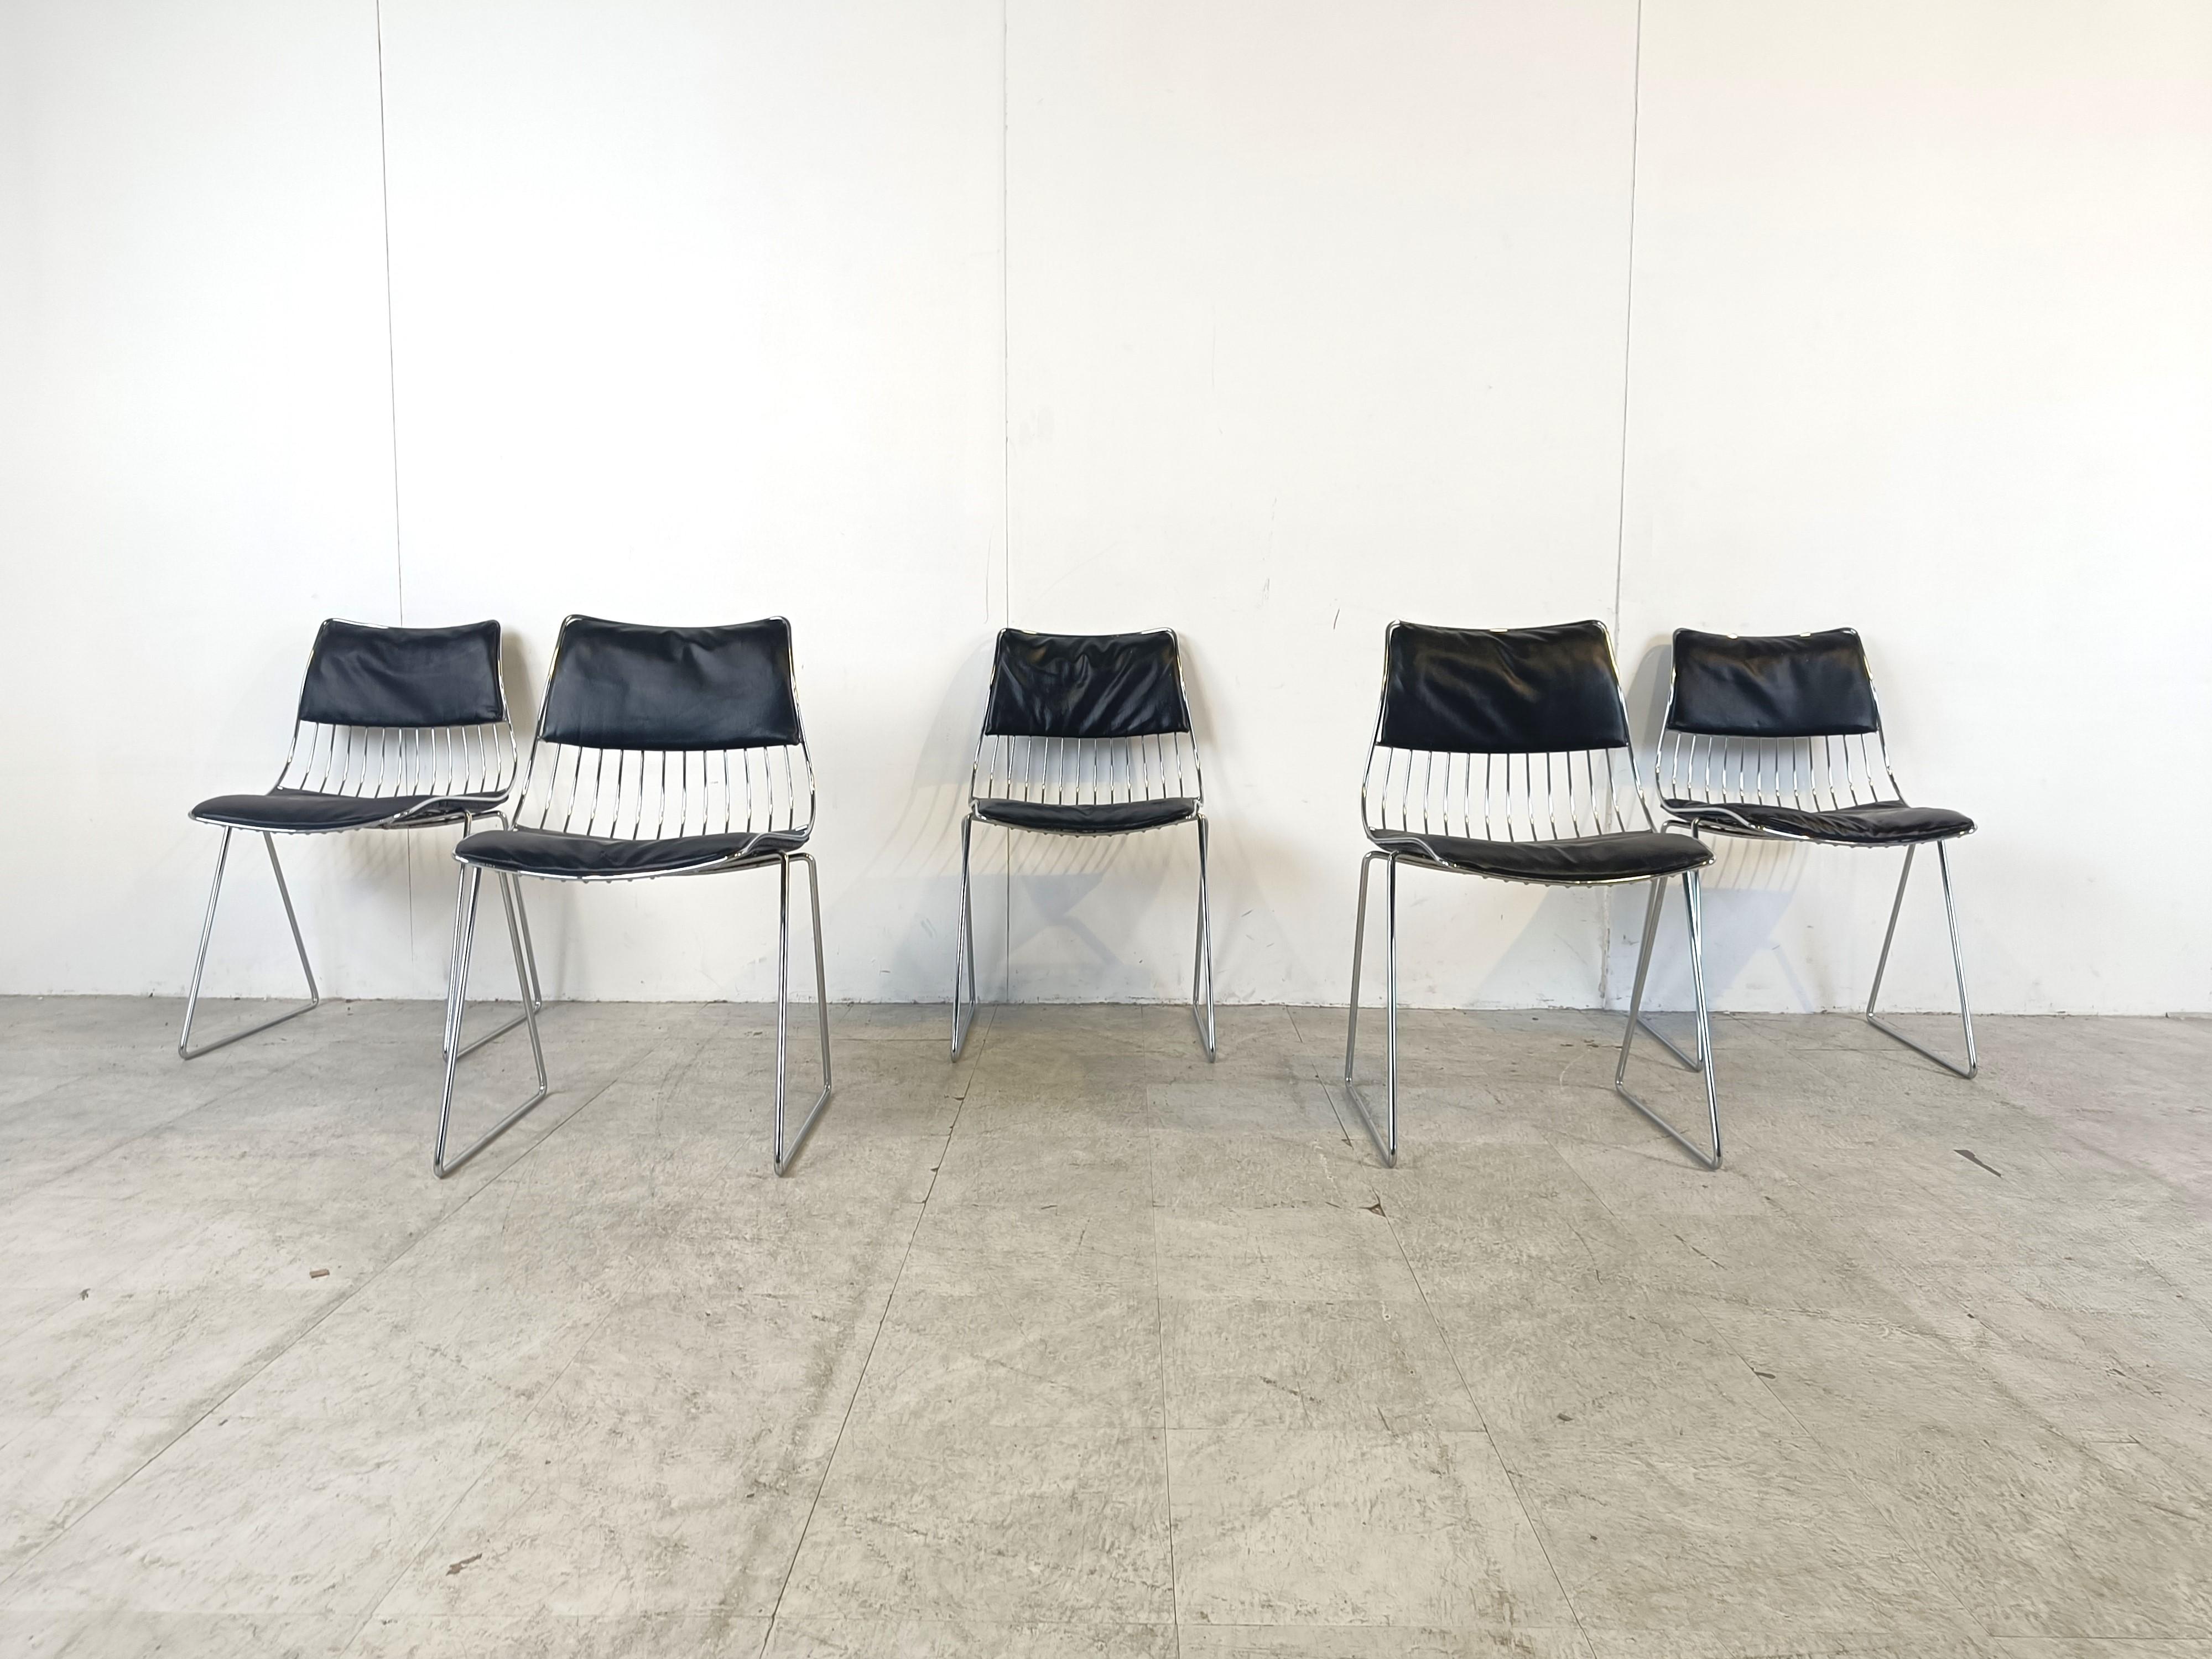 Space Age Set of 5 dining chairs by Rudi Verelst for Novalux, 1970s